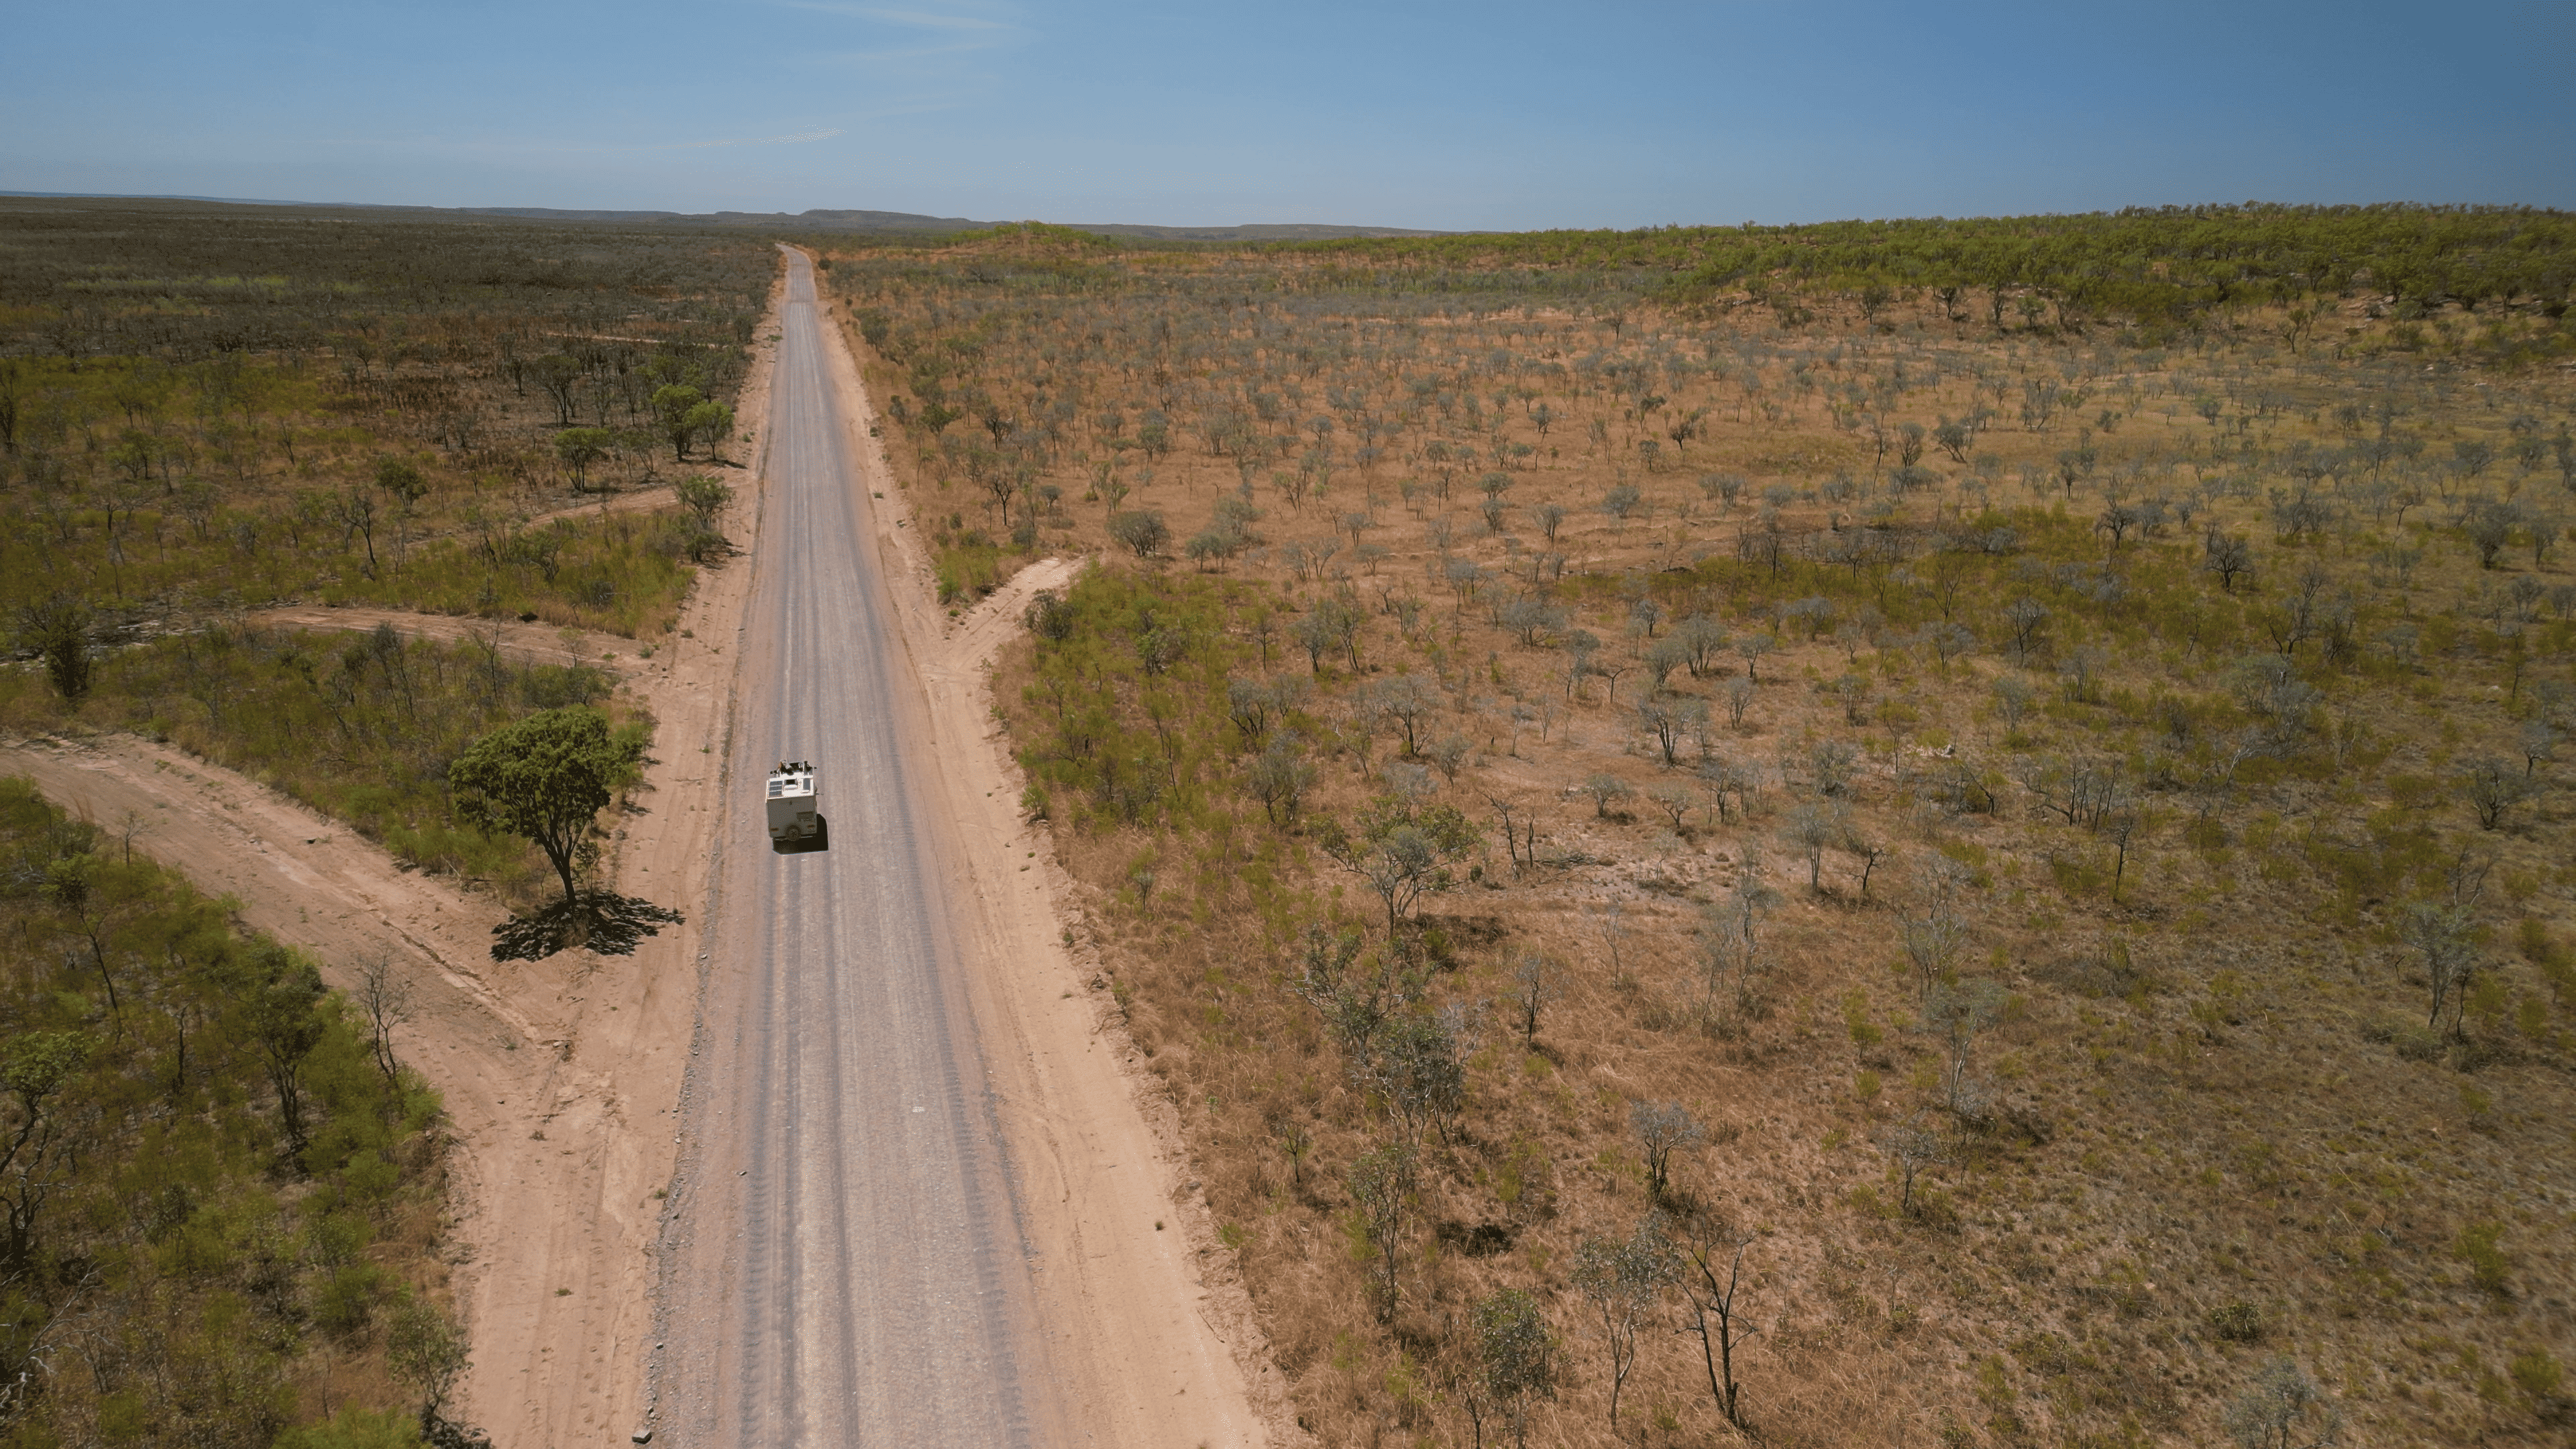 Driving in Australia's outback